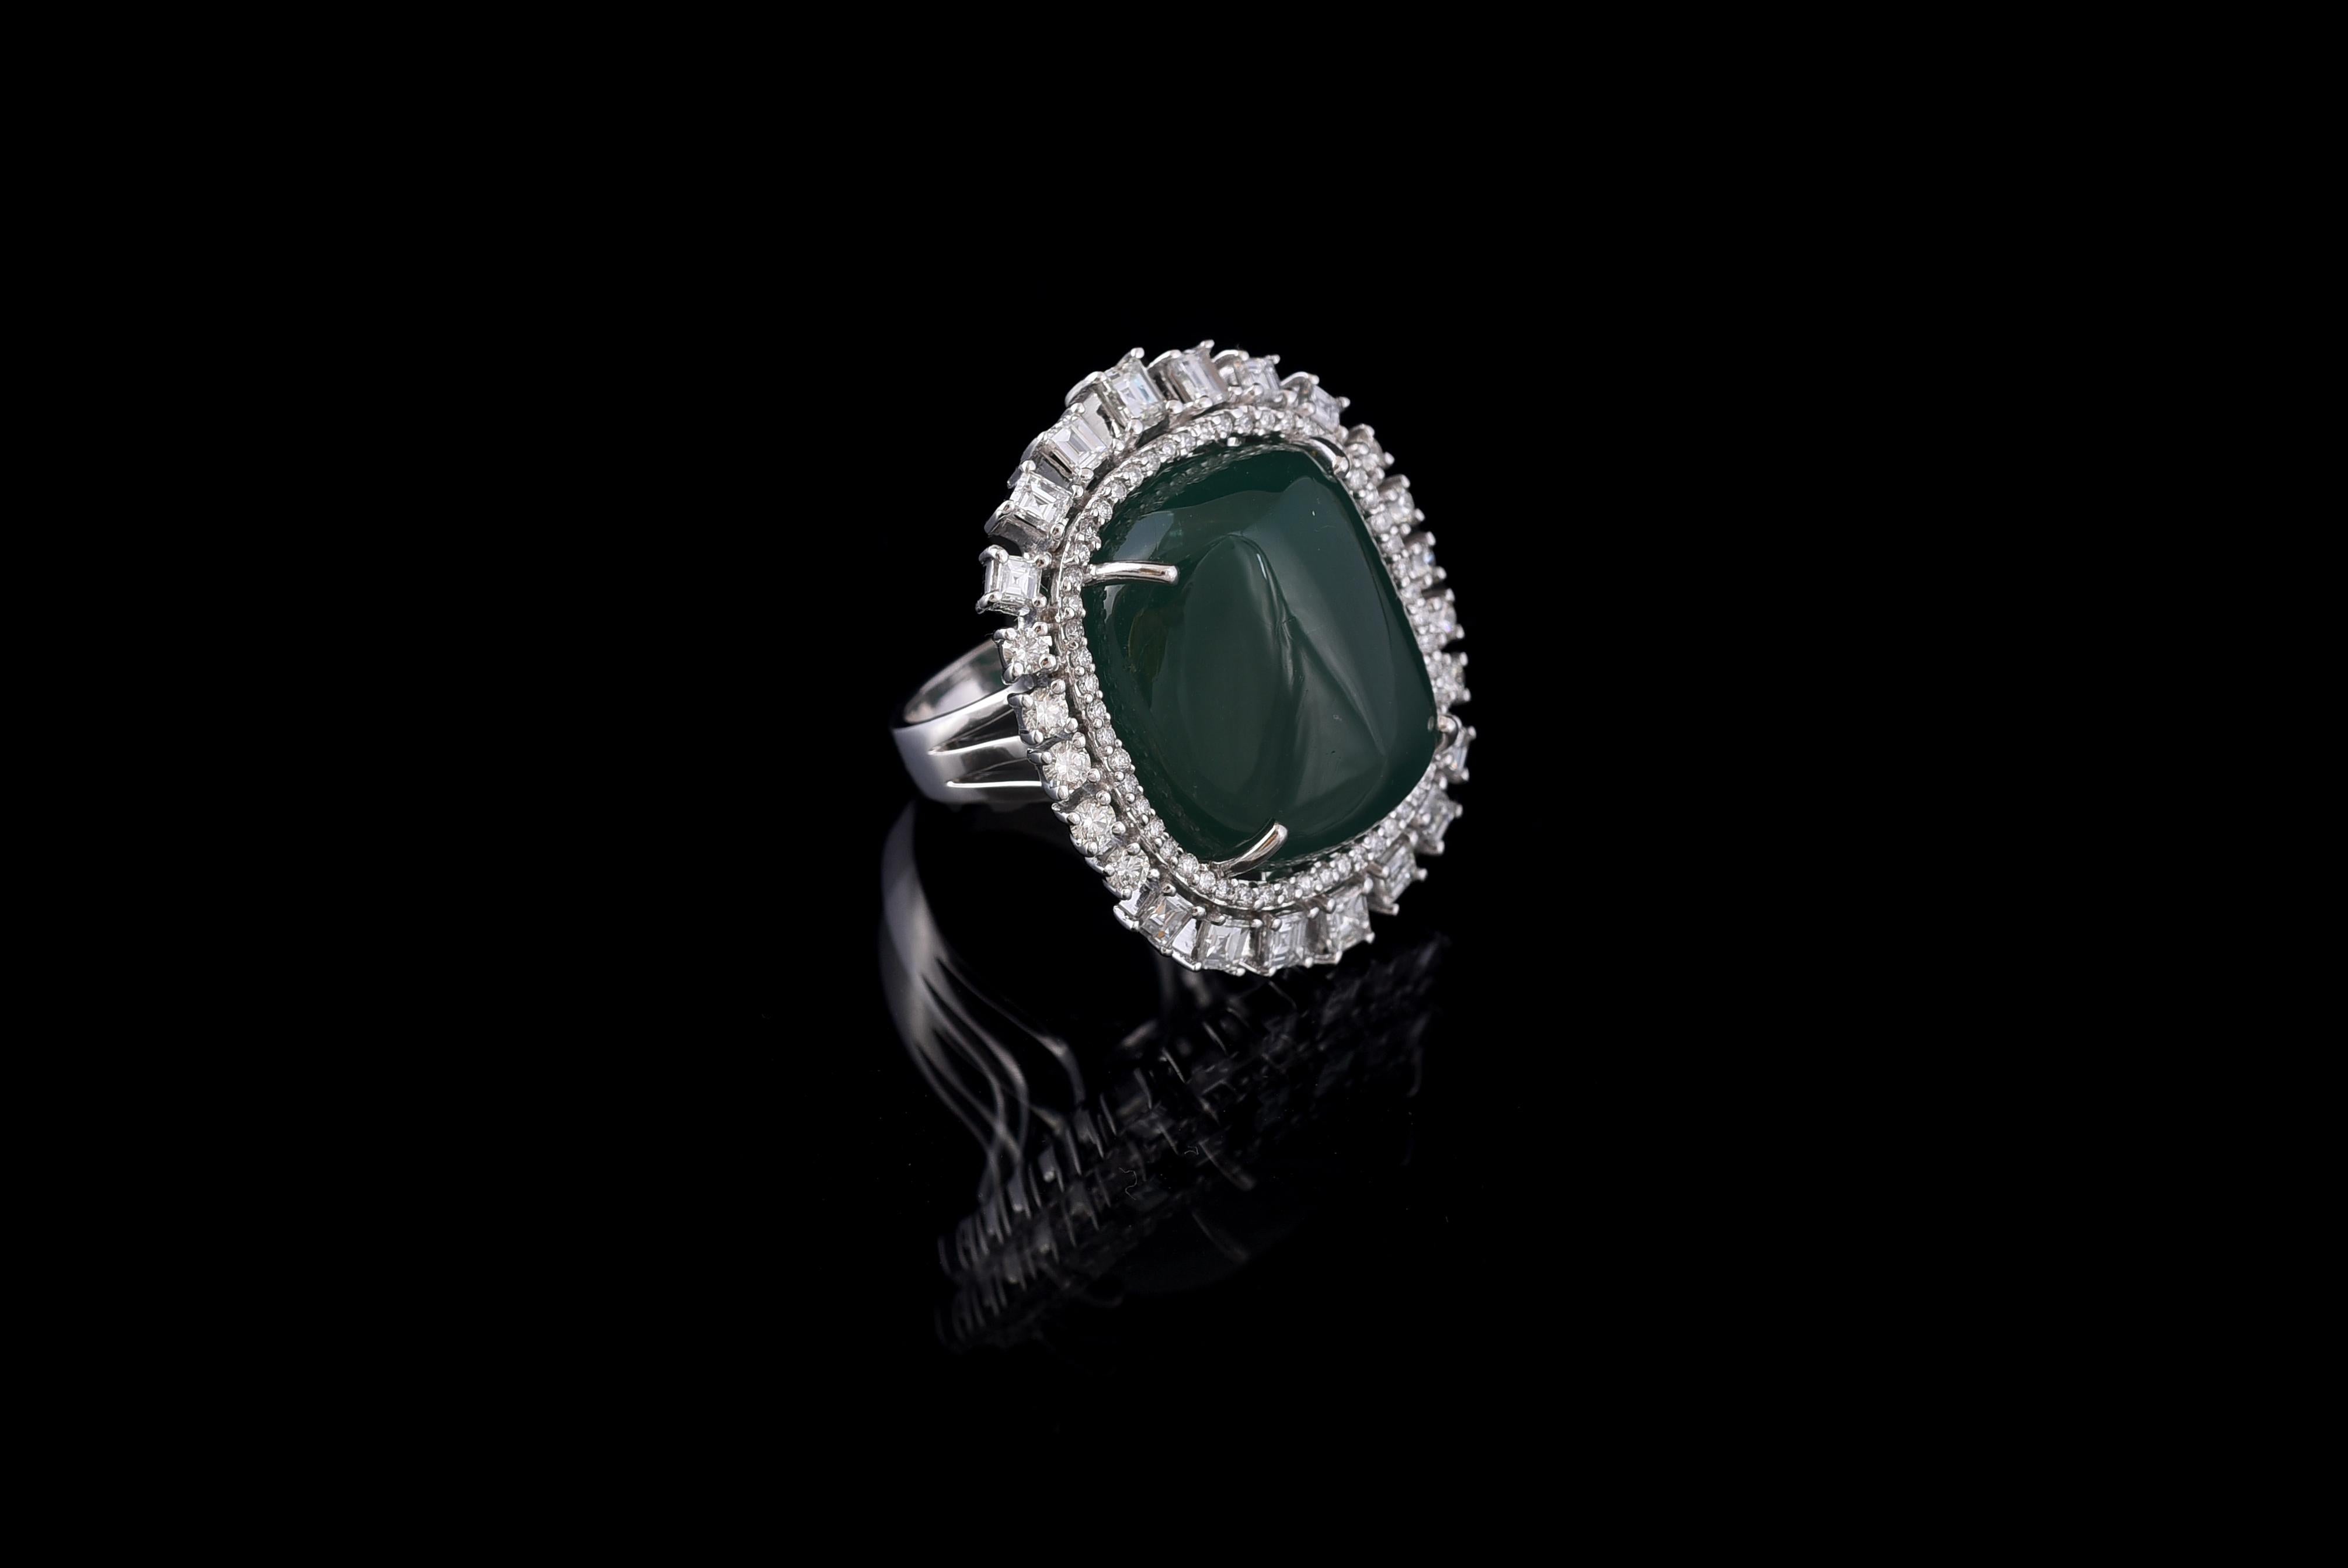 A gorgeous Emerald Cabochon and Princess diamonds Cocktail Ring set in 18K white gold. The Emerald is natural, without any treatment and originates from Zambia. The weight of the Emerald is 38.25 carats. The weight of the diamonds is 2.54 carats.